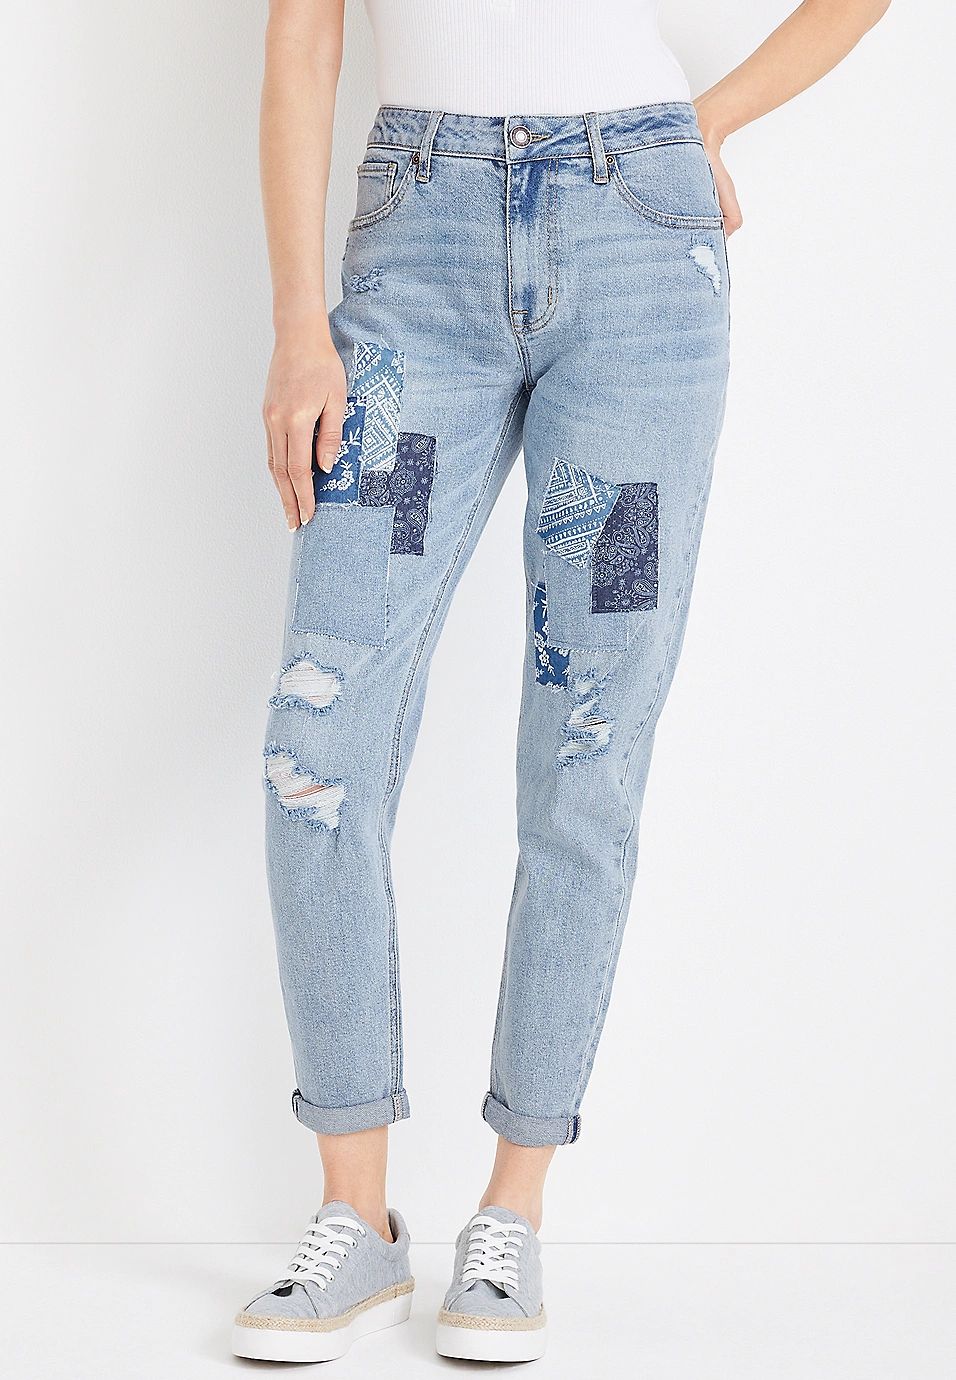 m jeans by maurices™ Tapered 90s High Rise Patchwork Ankle Jean | Maurices